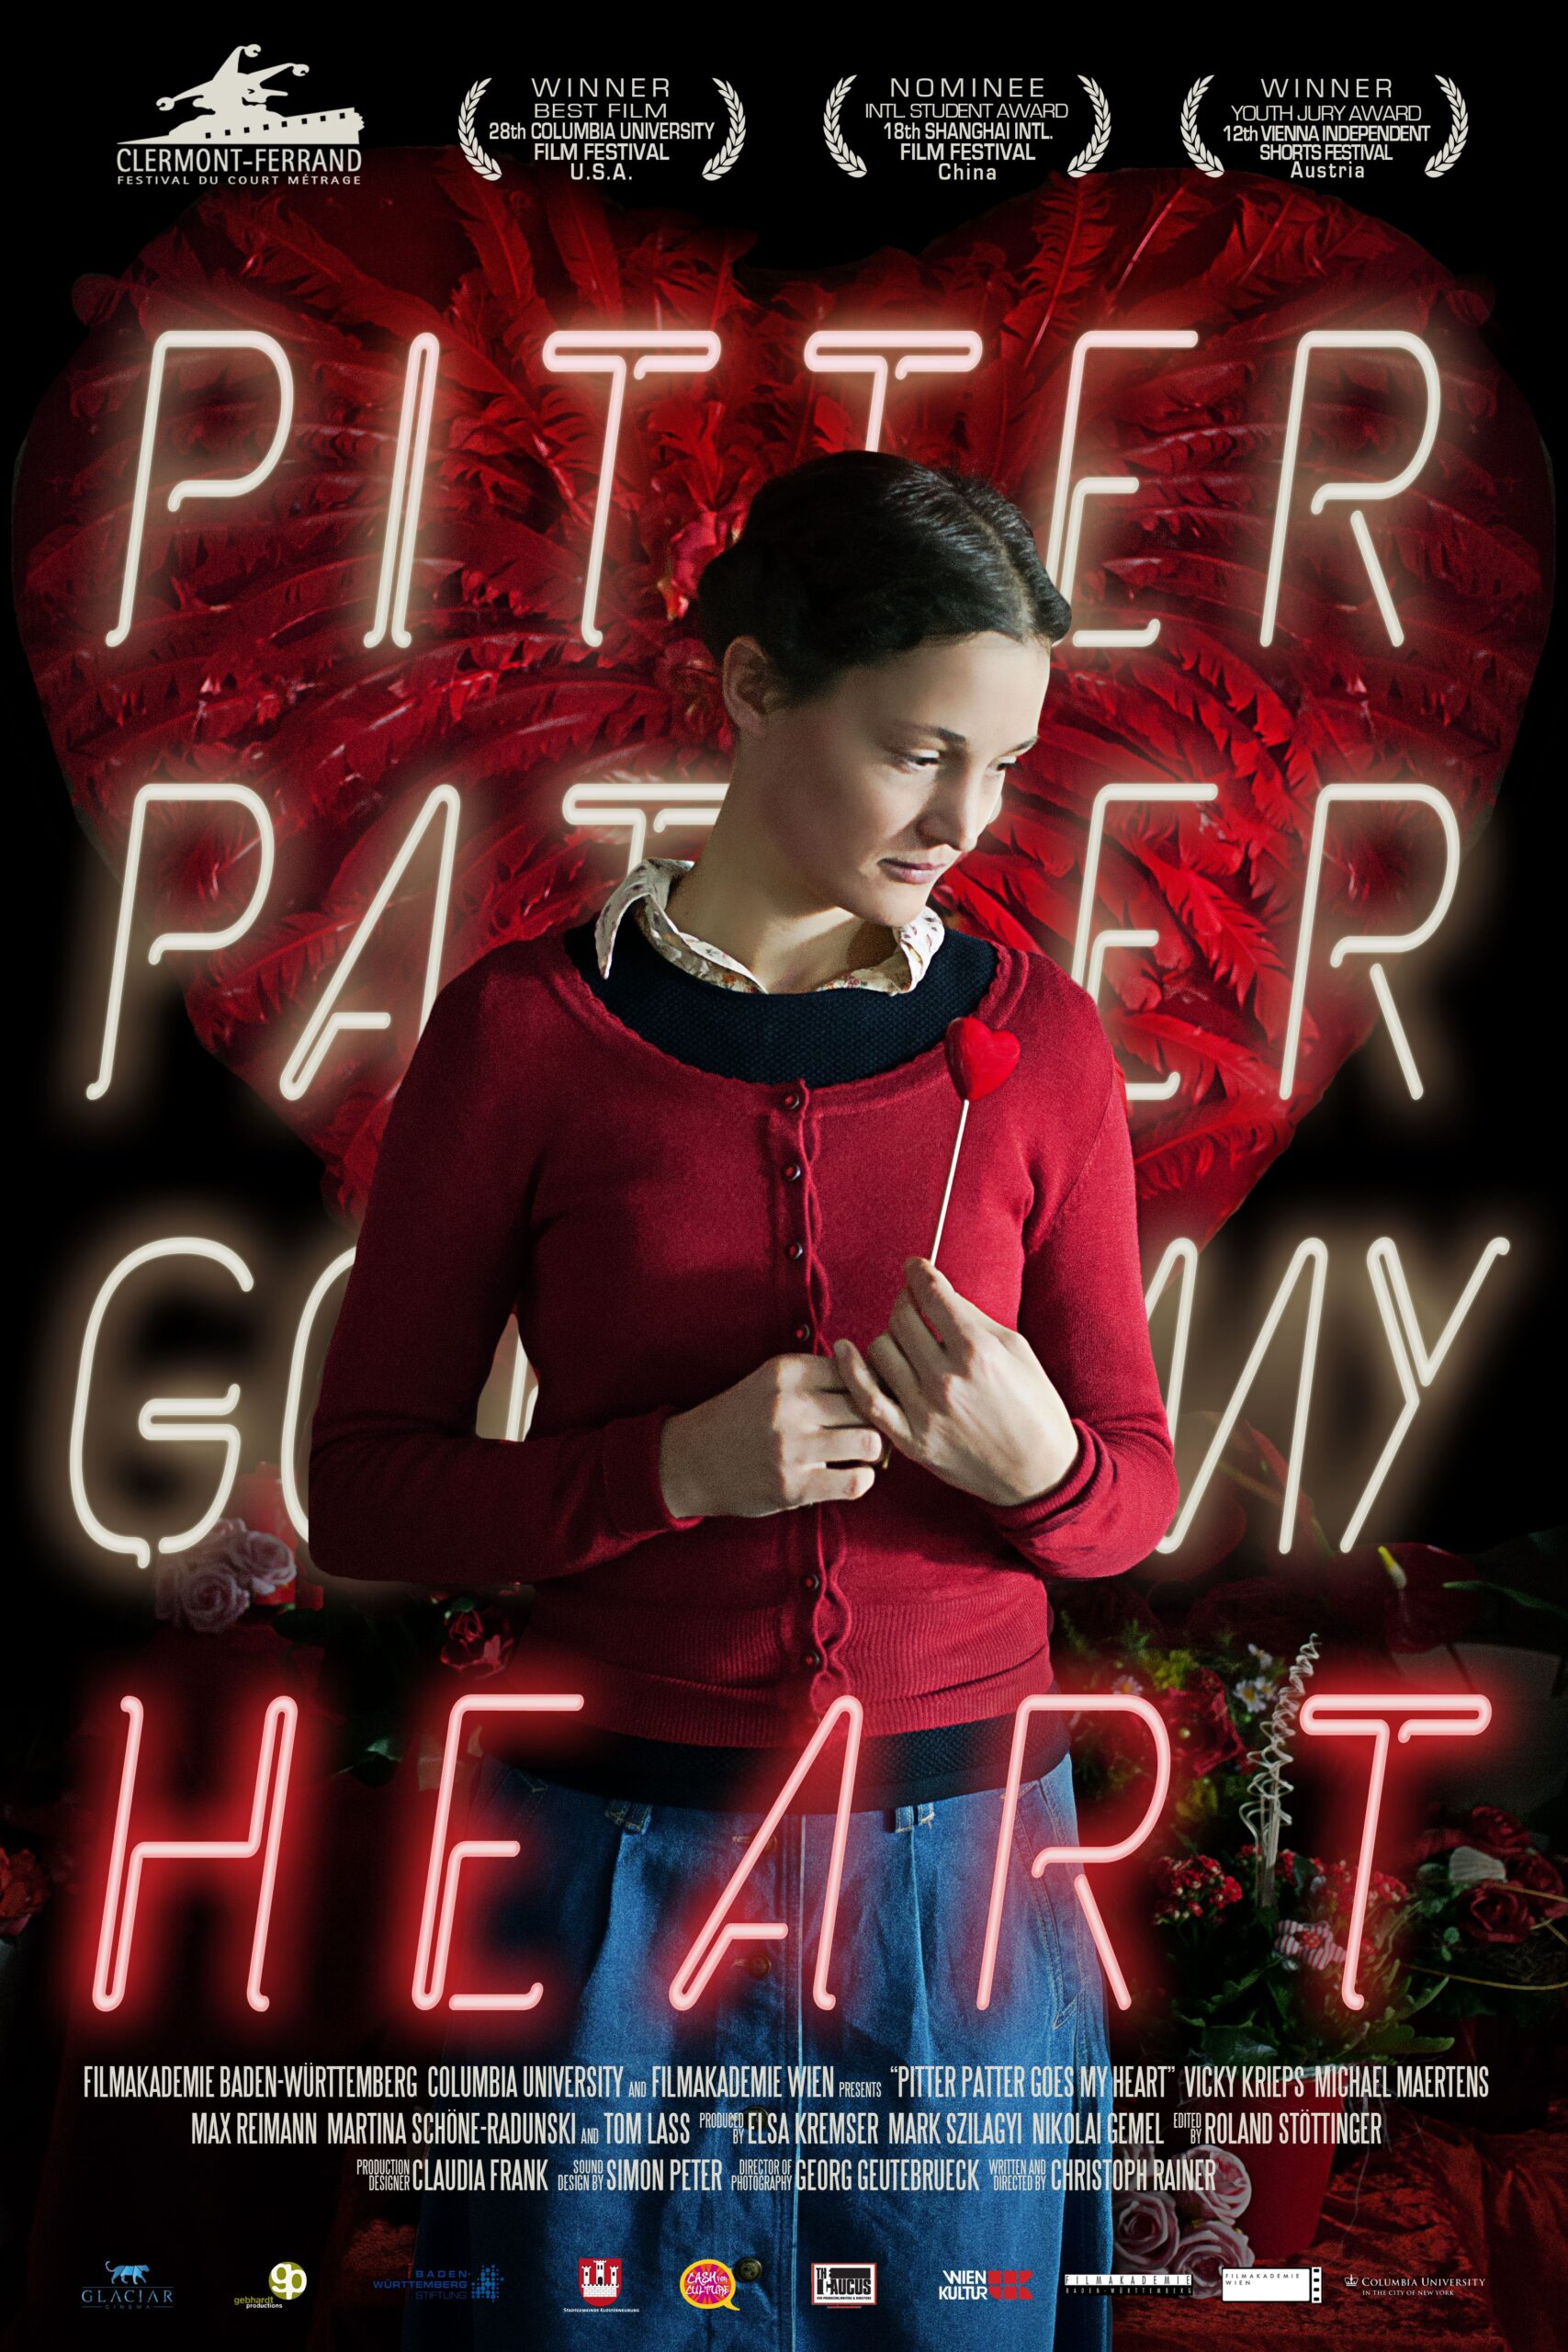 Aero Theatre Presents: Pitter Patter Goes My Heart and In Bed wth Victoria